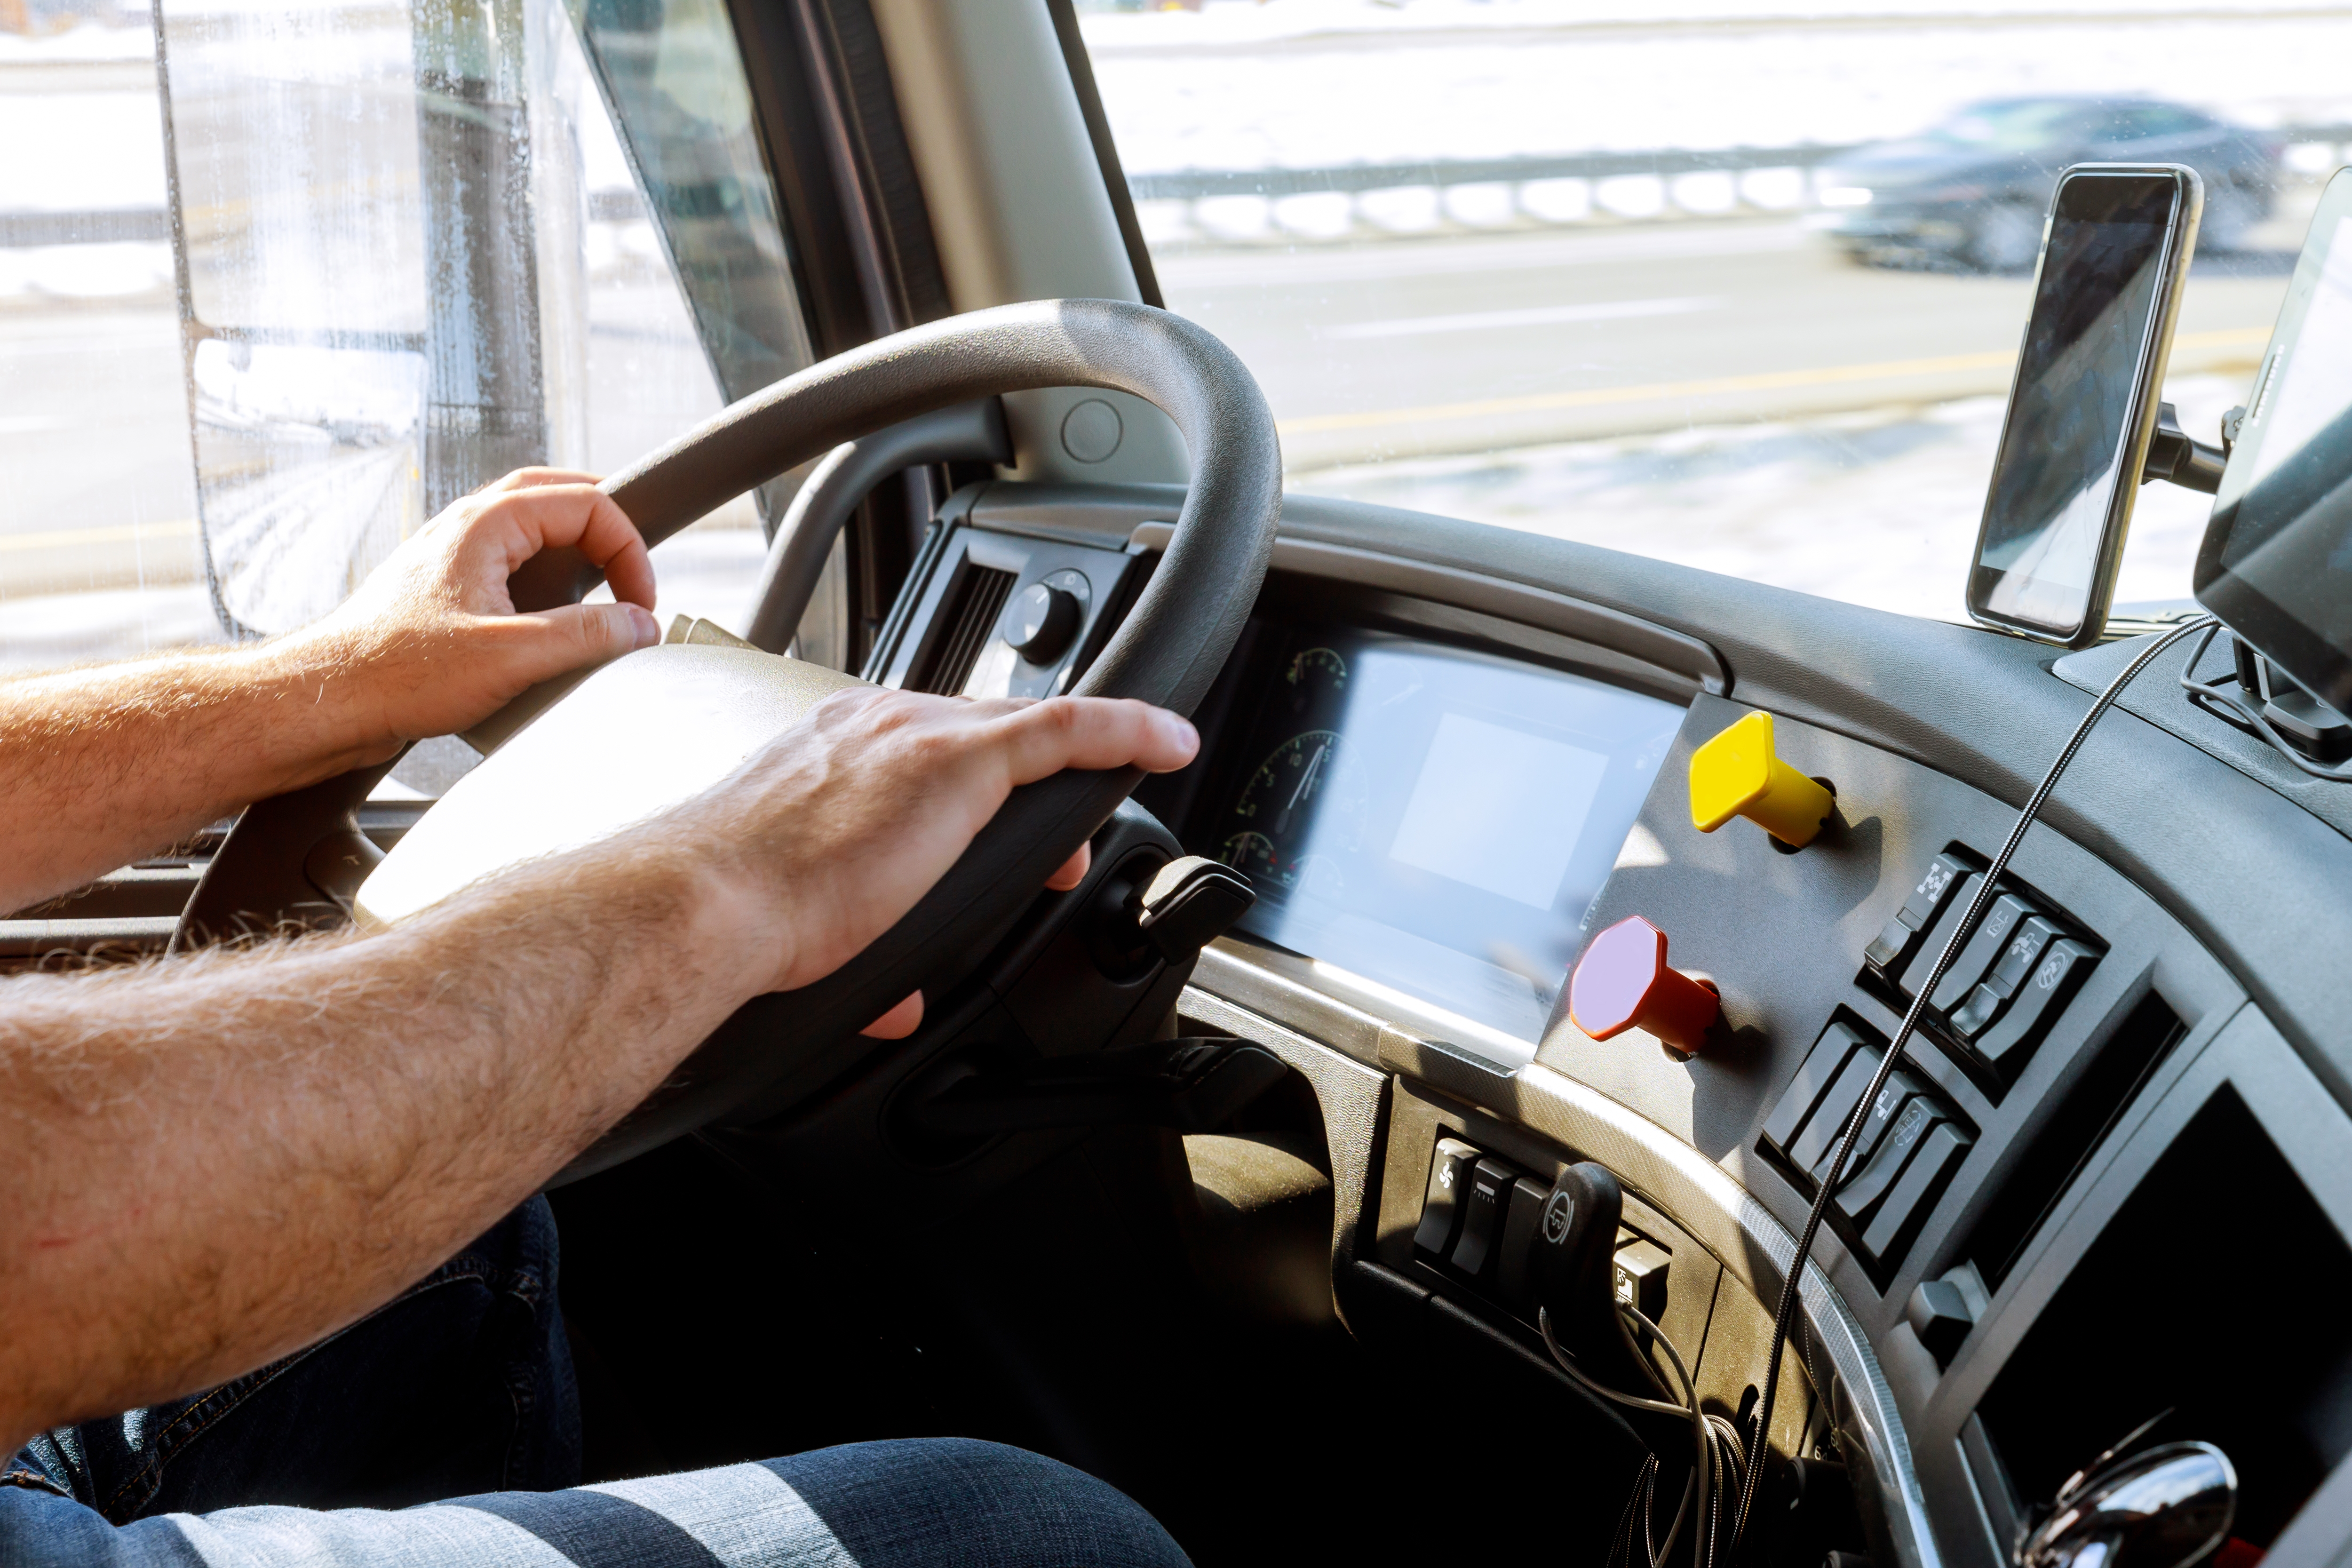 Electronic Truck Logging Improves Compliance – But Does It Make the Roads Safer?